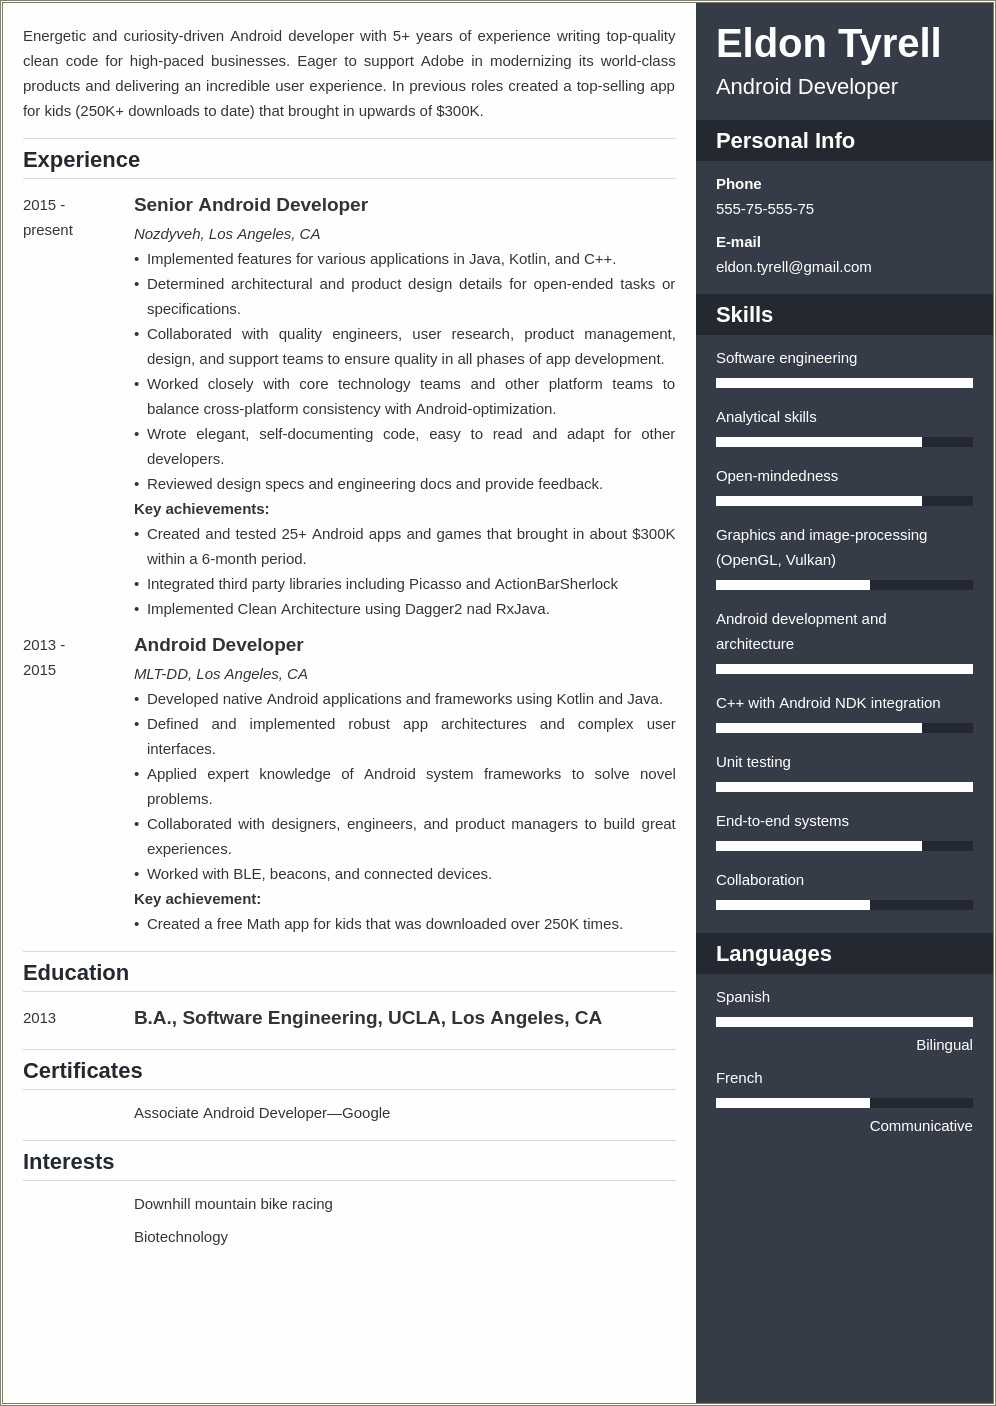 Android Developer Resume 8 Years Experience